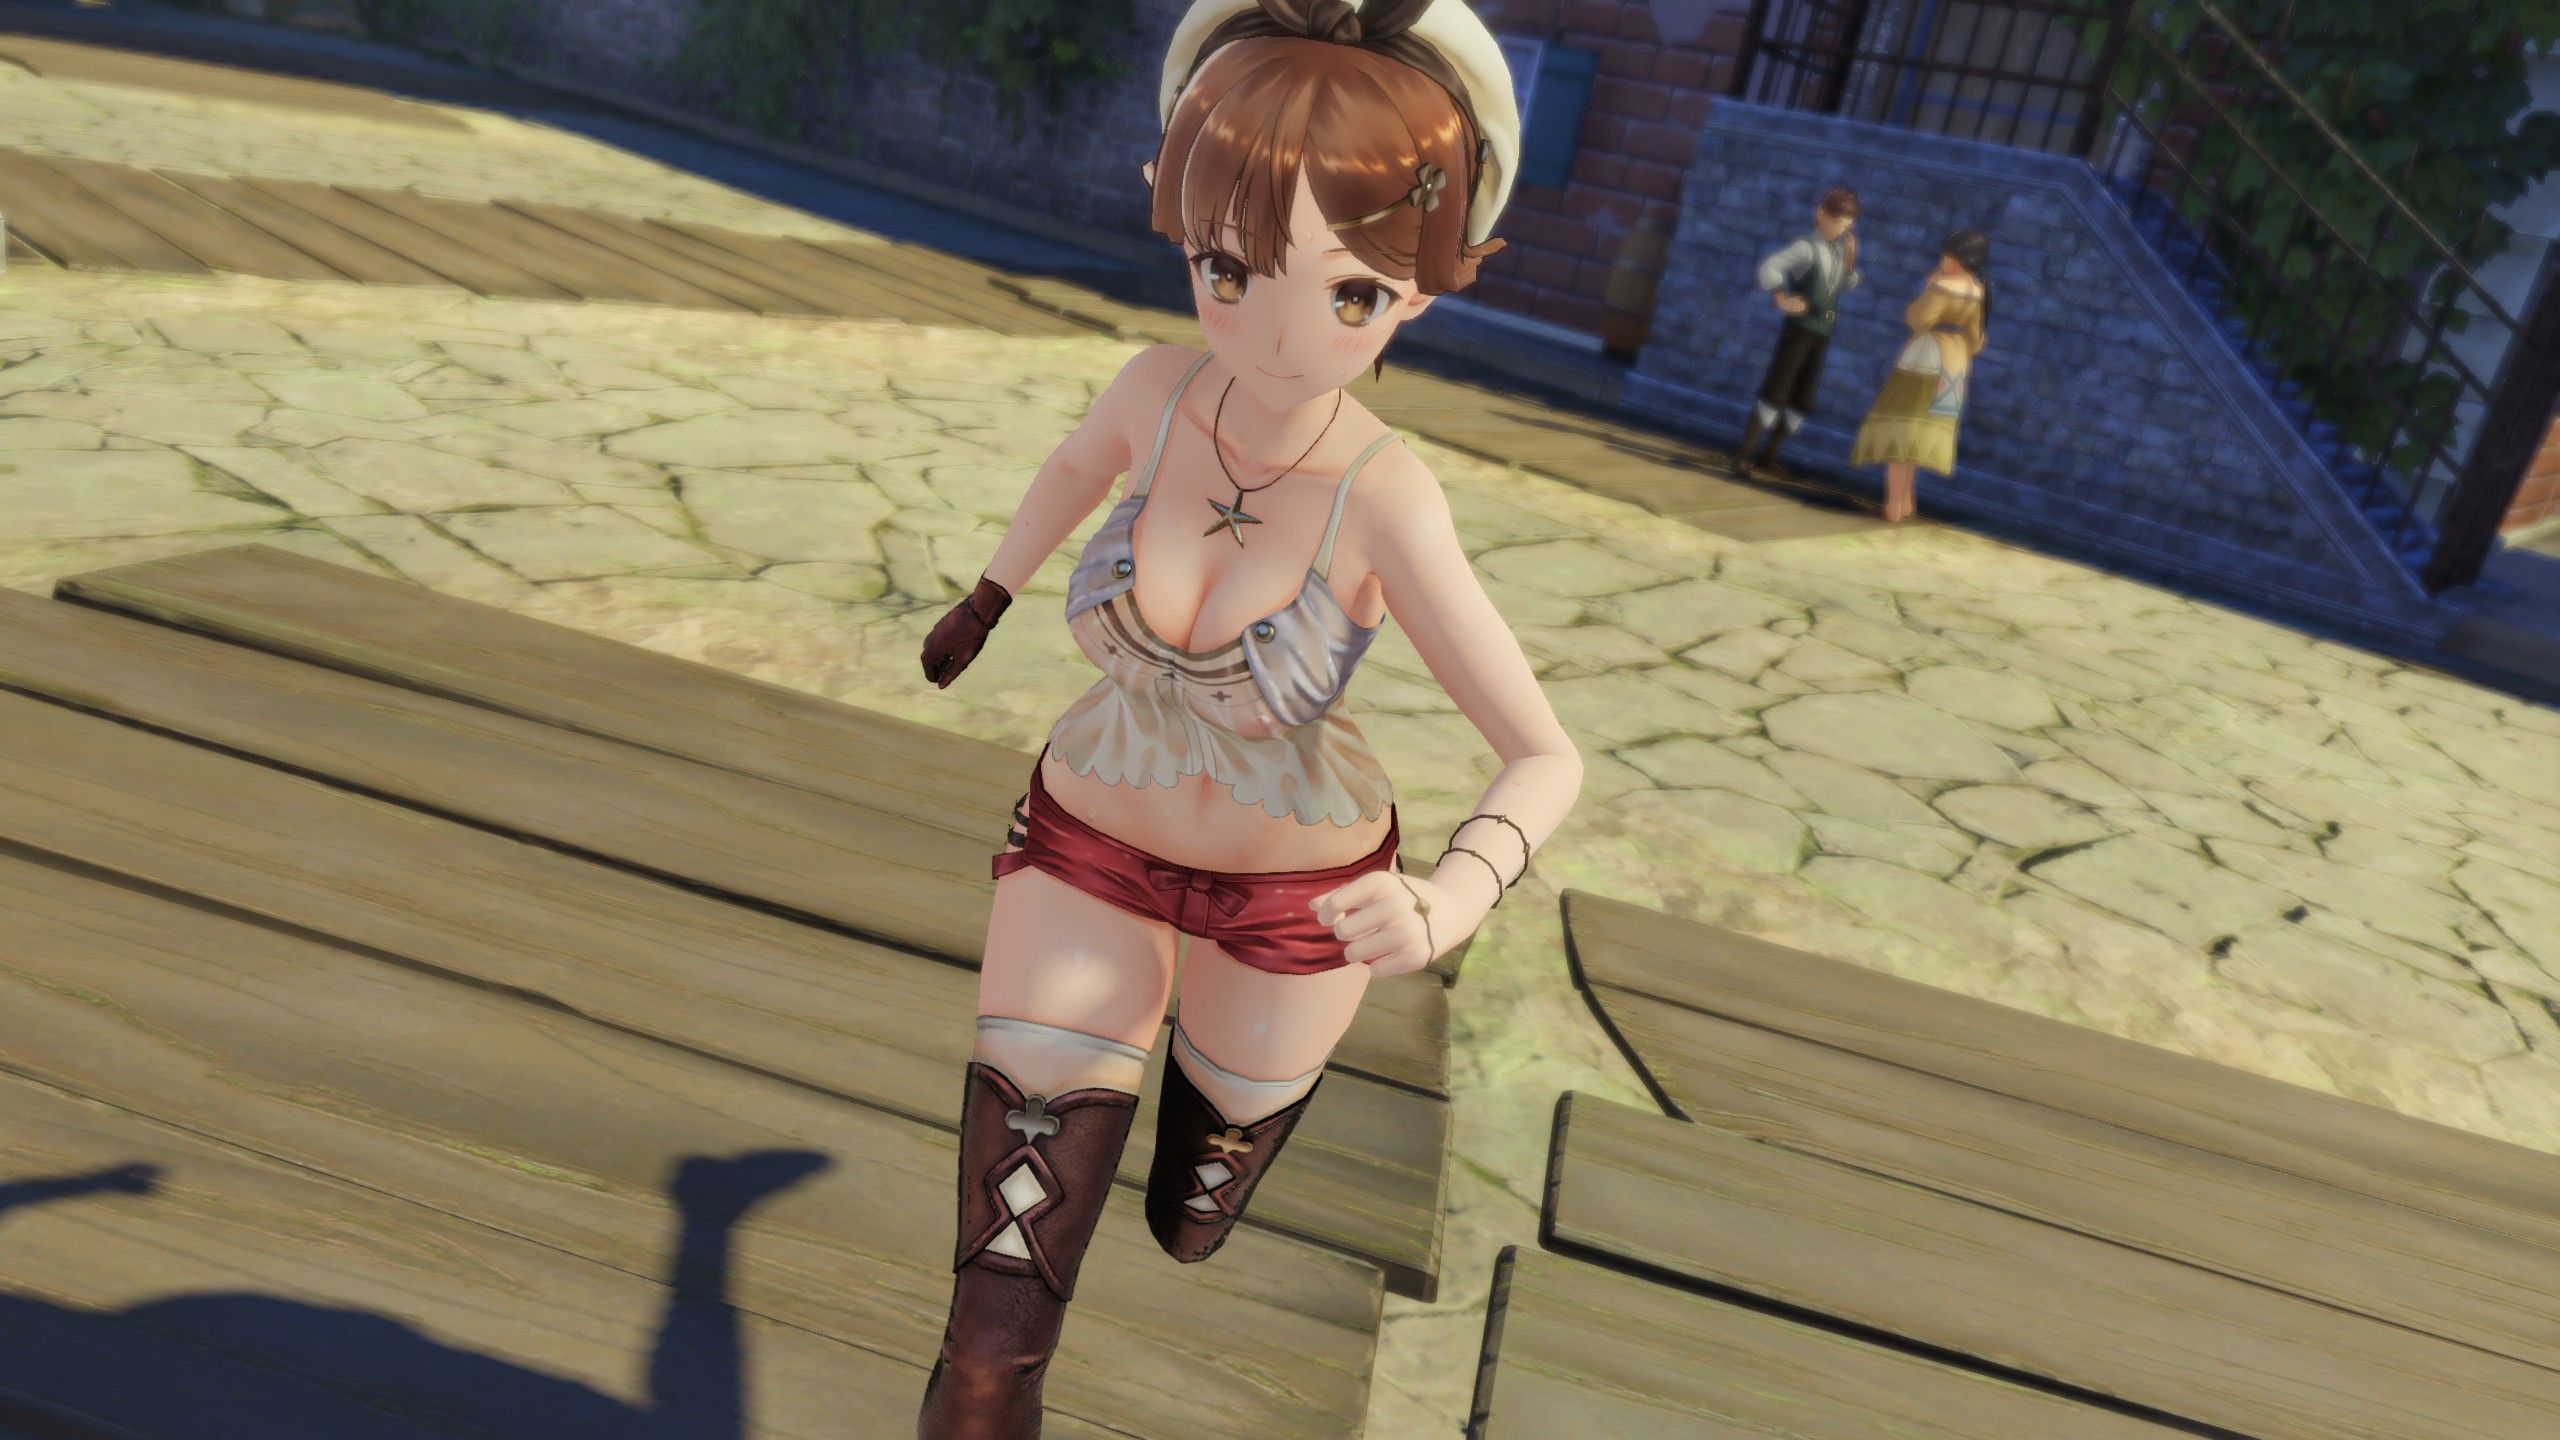 Buy a PC version liza atelier but also spend 2 days to make nipples transparent with erotic MOD ... 8